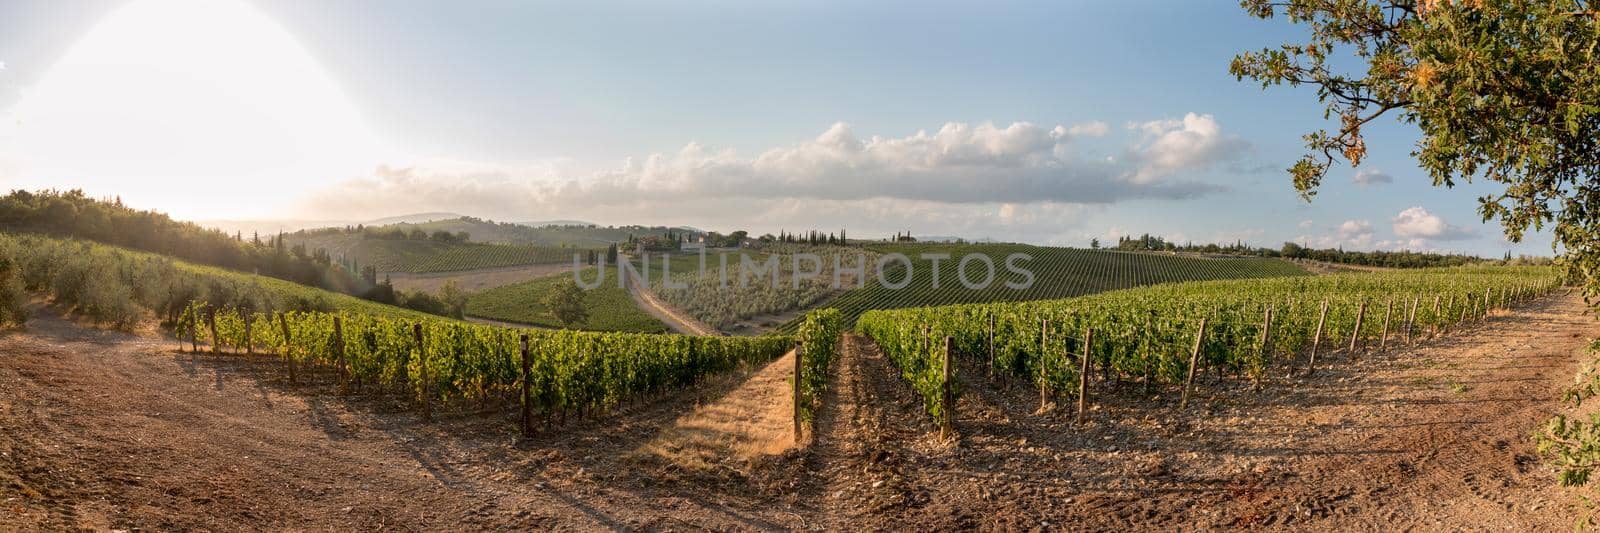 Vineyards with grapevine and winery along wine road in the evening, Tuscany, Italy by Daxenbichler